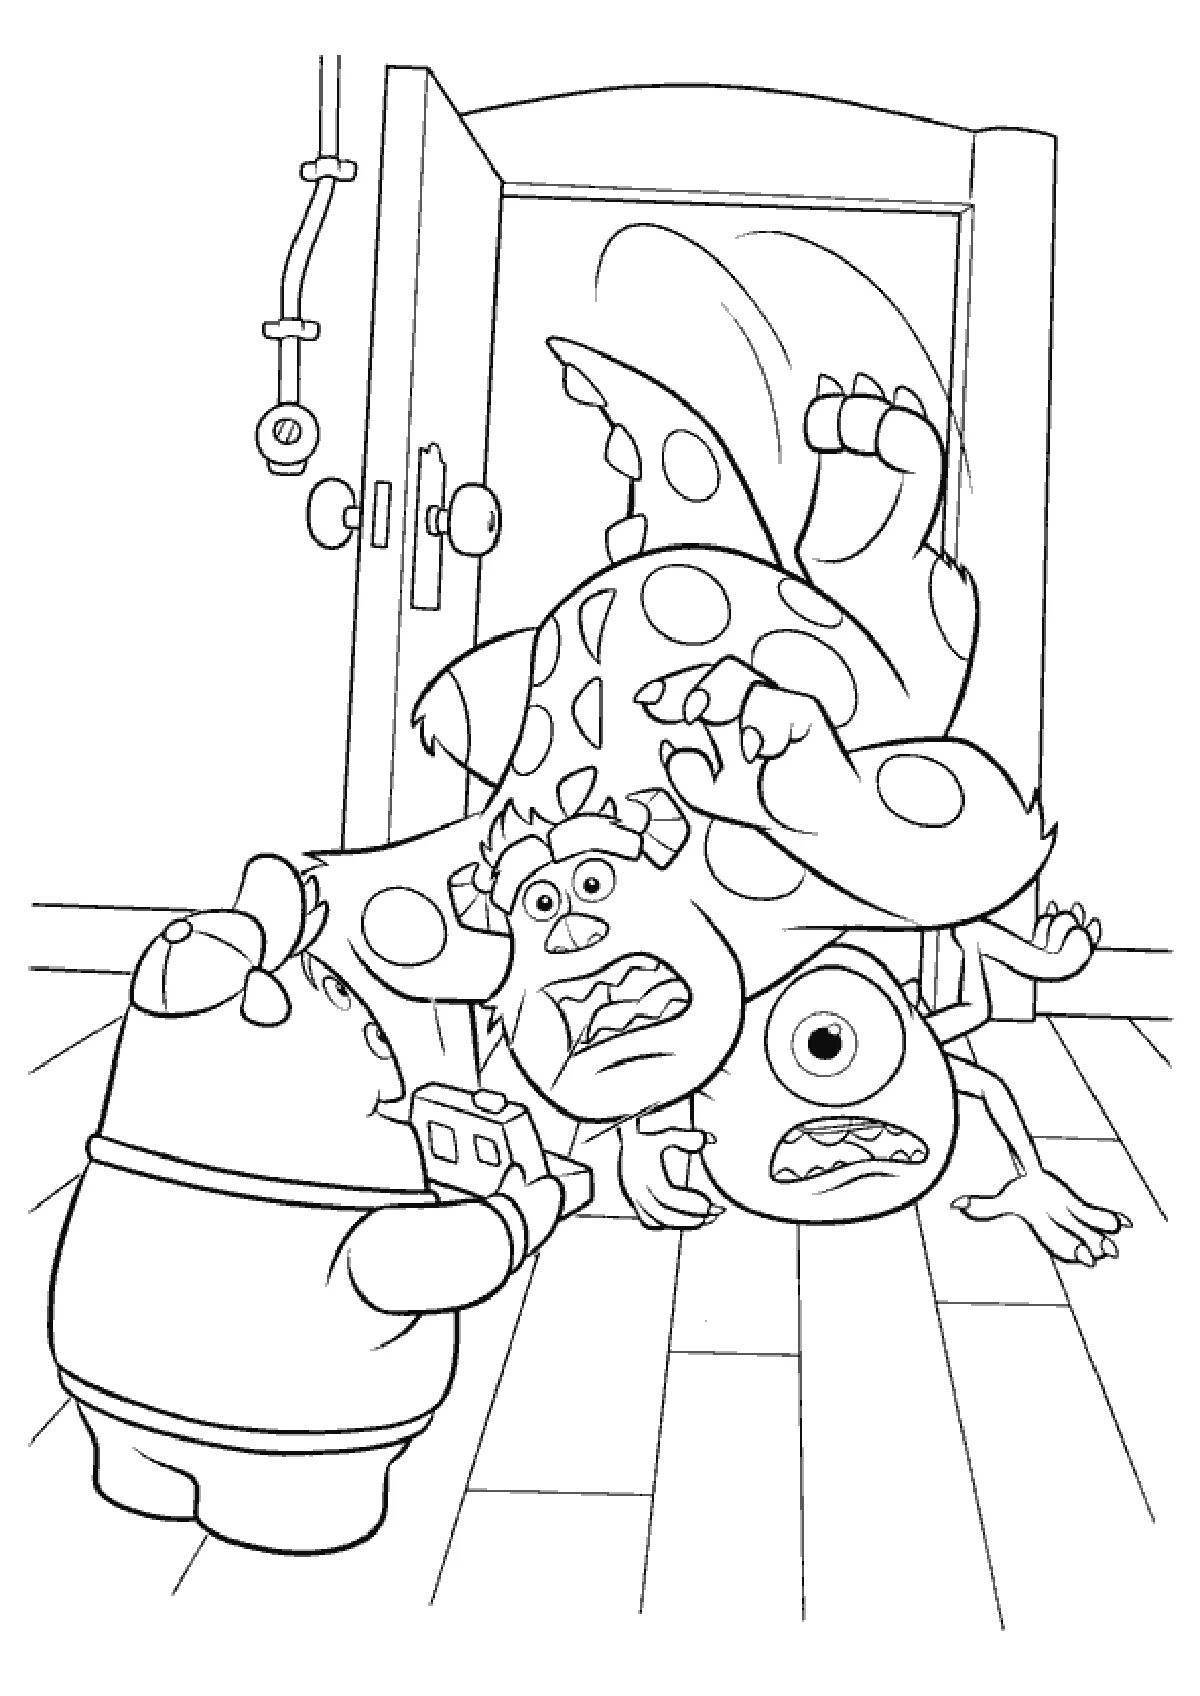 Dynamic Monsters University coloring page